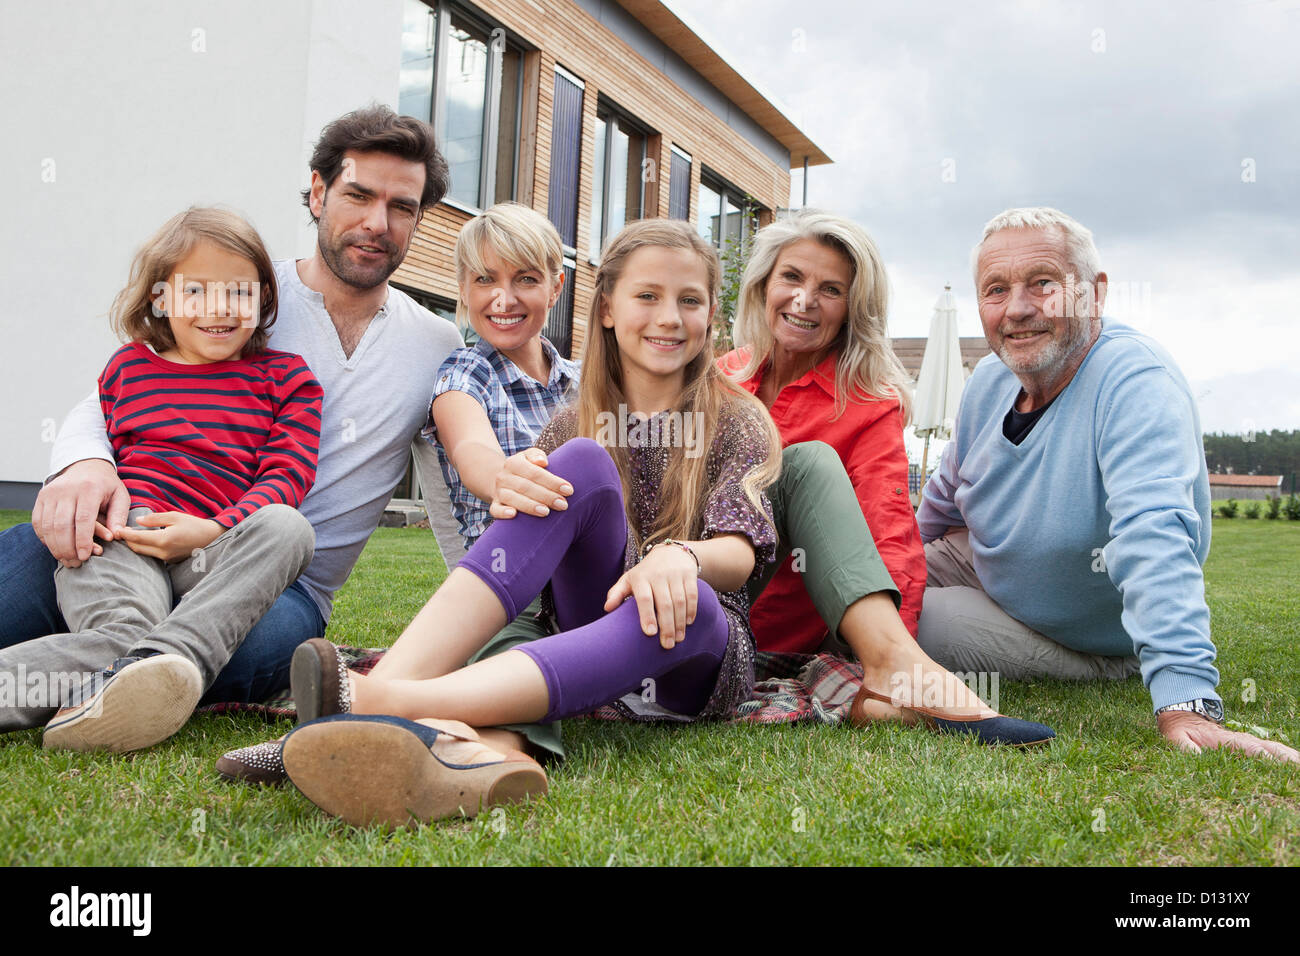 Germany, Bavaria, Nuremberg, Family sitting in front of house, smiling, portrait Stock Photo